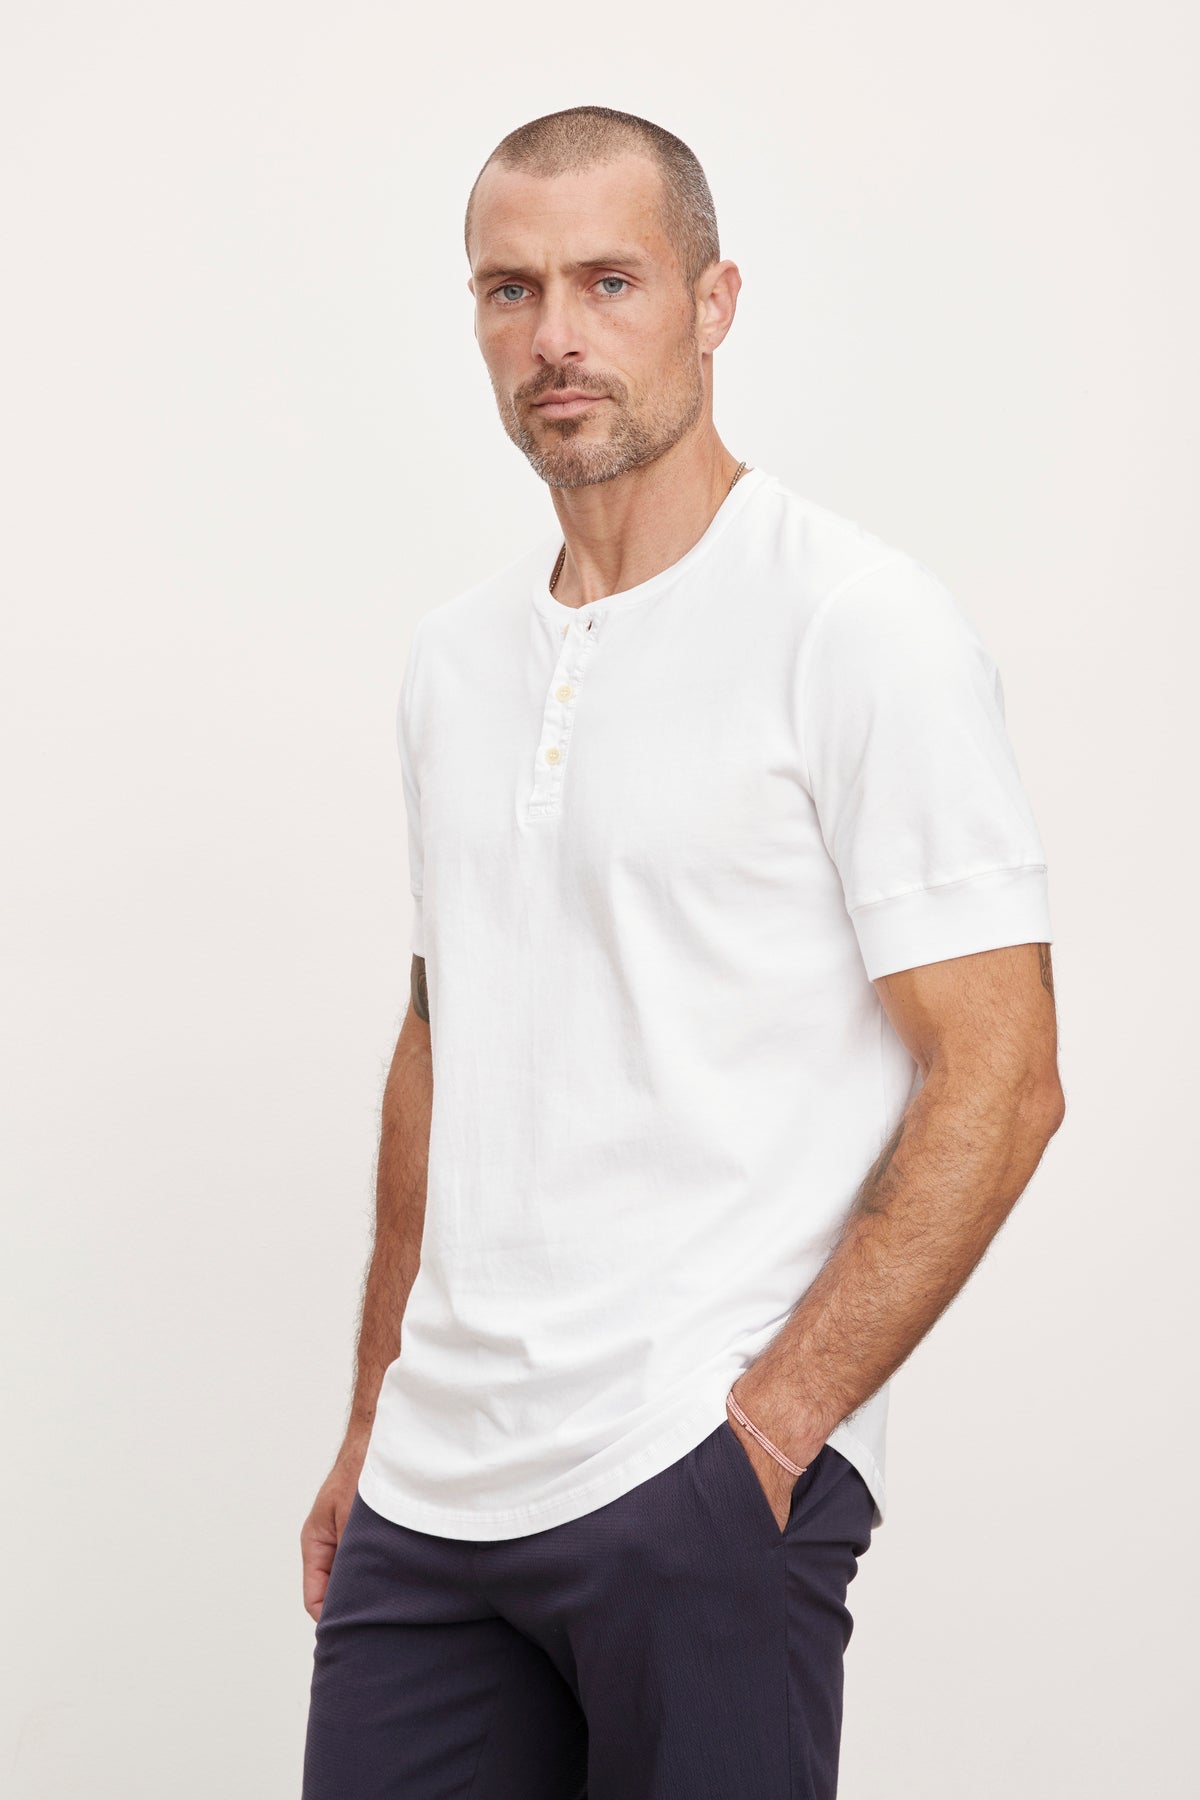 A man with a beard in a white DEON HENLEY shirt by Velvet by Graham & Spencer and navy trousers stands with hands in pockets, looking directly at the camera.-36753582850241